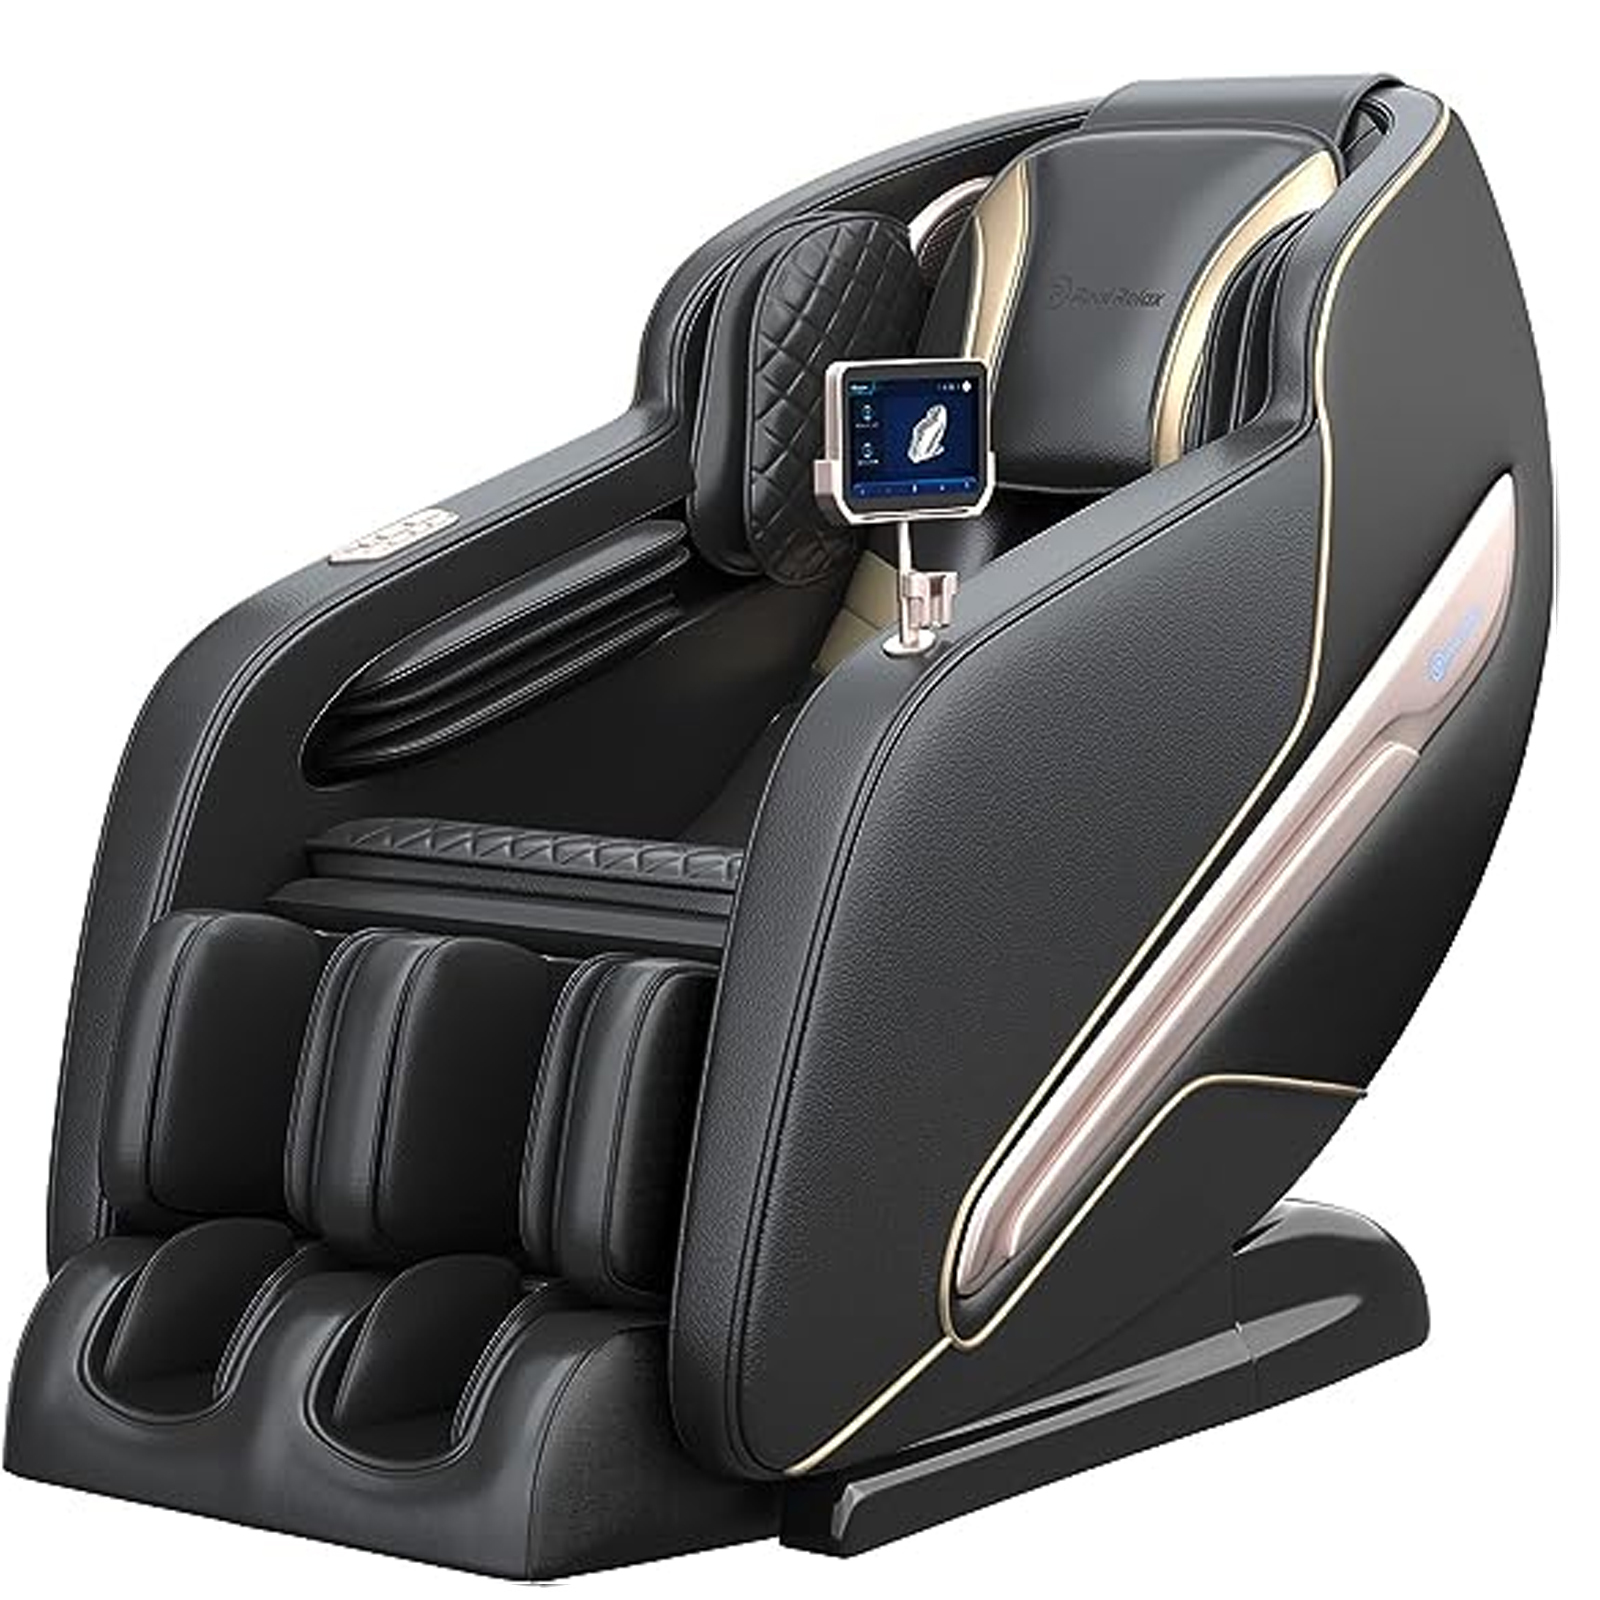 Primary image for Real Relax® PS6000 SL FullBody Scan Shortcut Key Heat Foot Roller Massage Chair